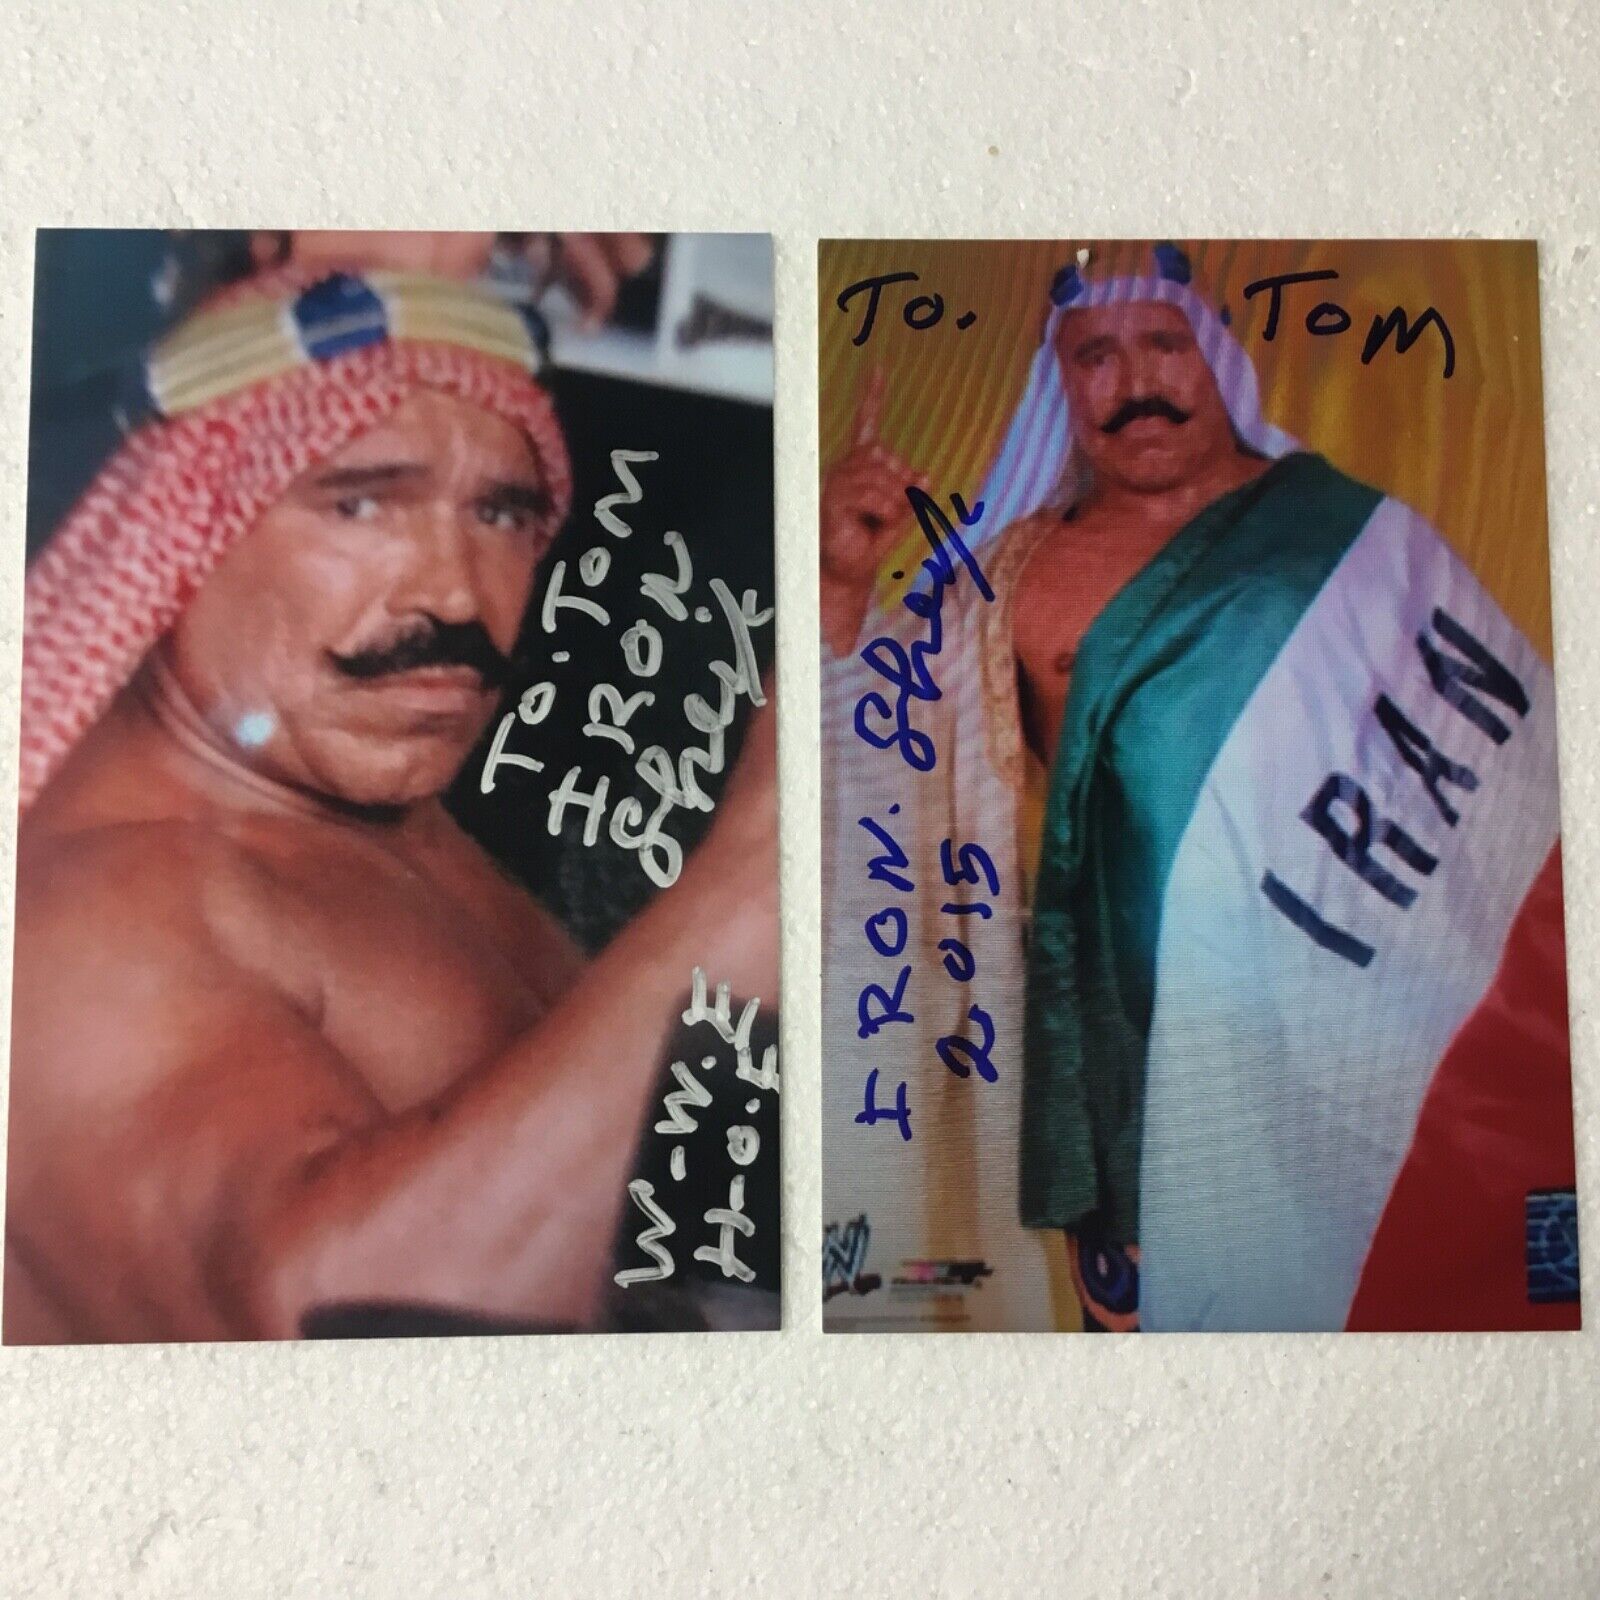 THE IRON SHEIK (2) AUTOGRAPHED CANDID COLOR Photo Poster paintingS IN SHARPIE PC928